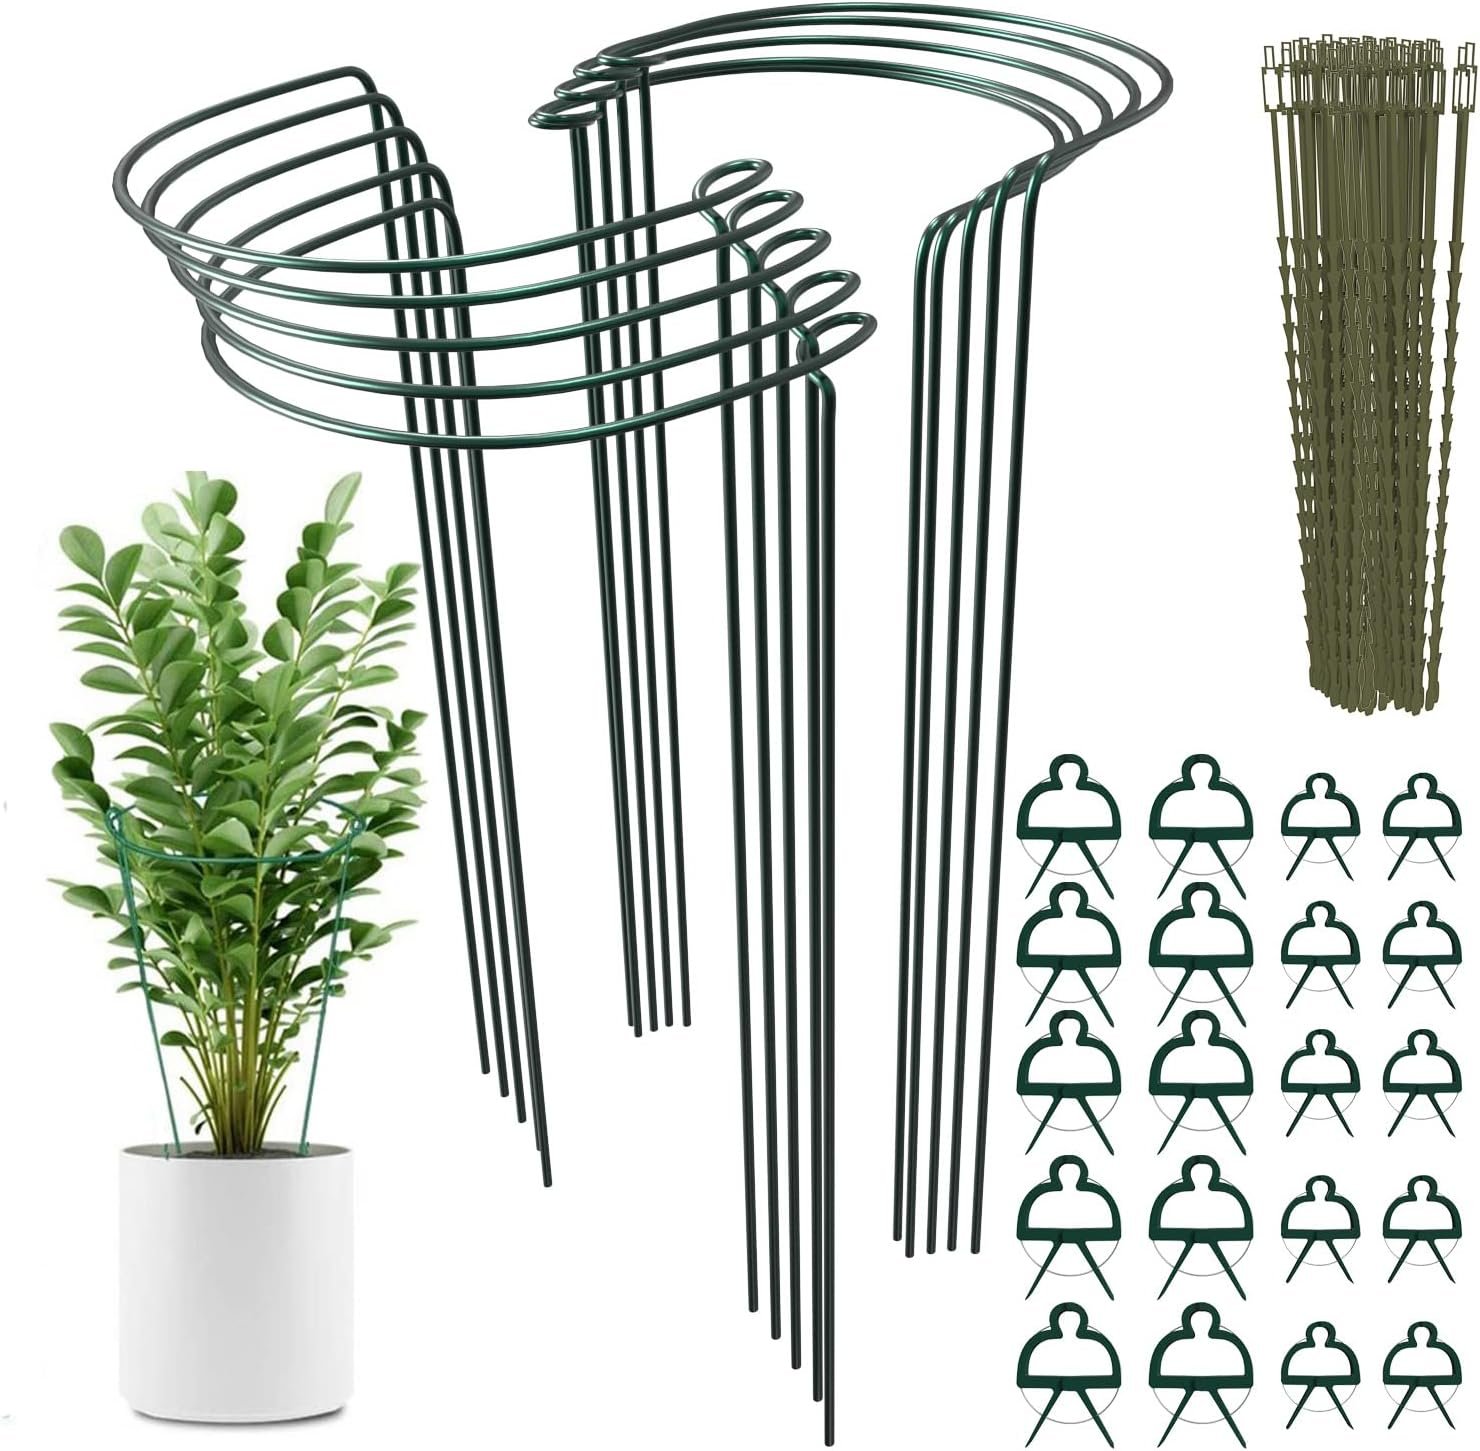 Grow Aid 10 Pack Plant Support Stakes | 10”W x 24”H Metal Garden Plant Stakes for Outdoor Indoor Plants | 24 inch Peony Cages Supports Ring with 20 Plant Ties  Clips for Tomato, Hydrangea